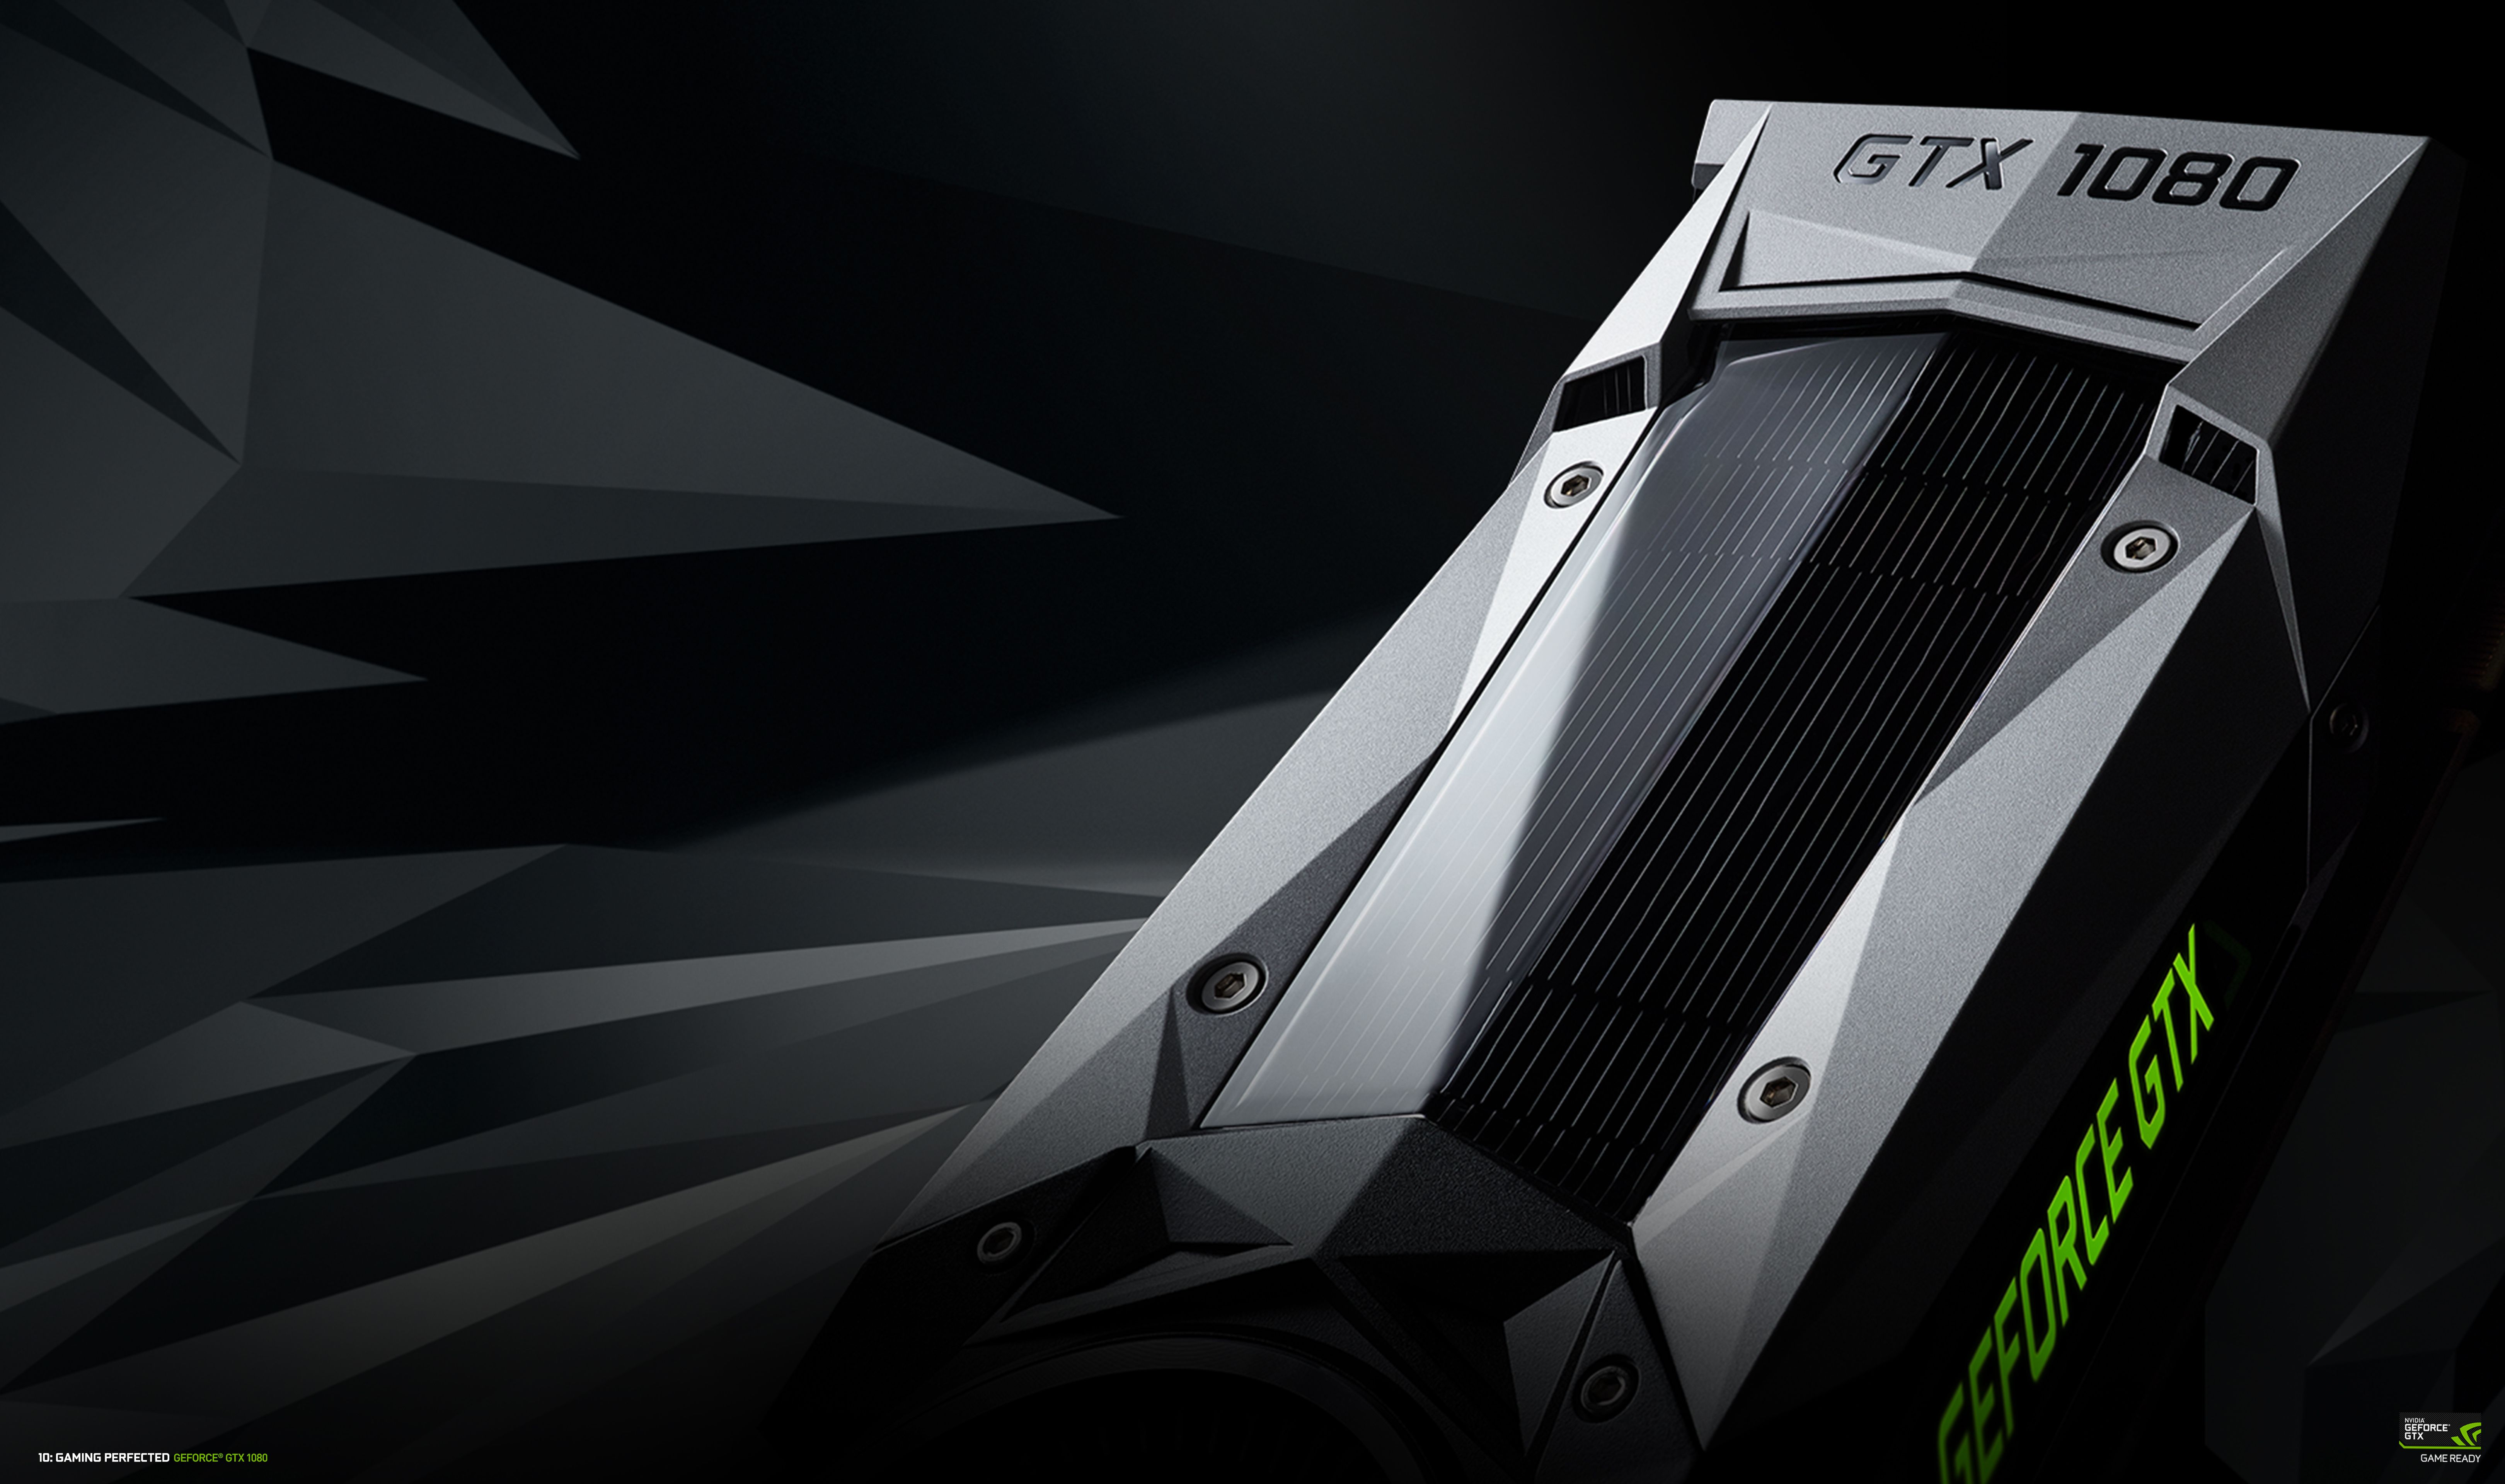 Free GeForce Wallpaper for your Gaming Rig